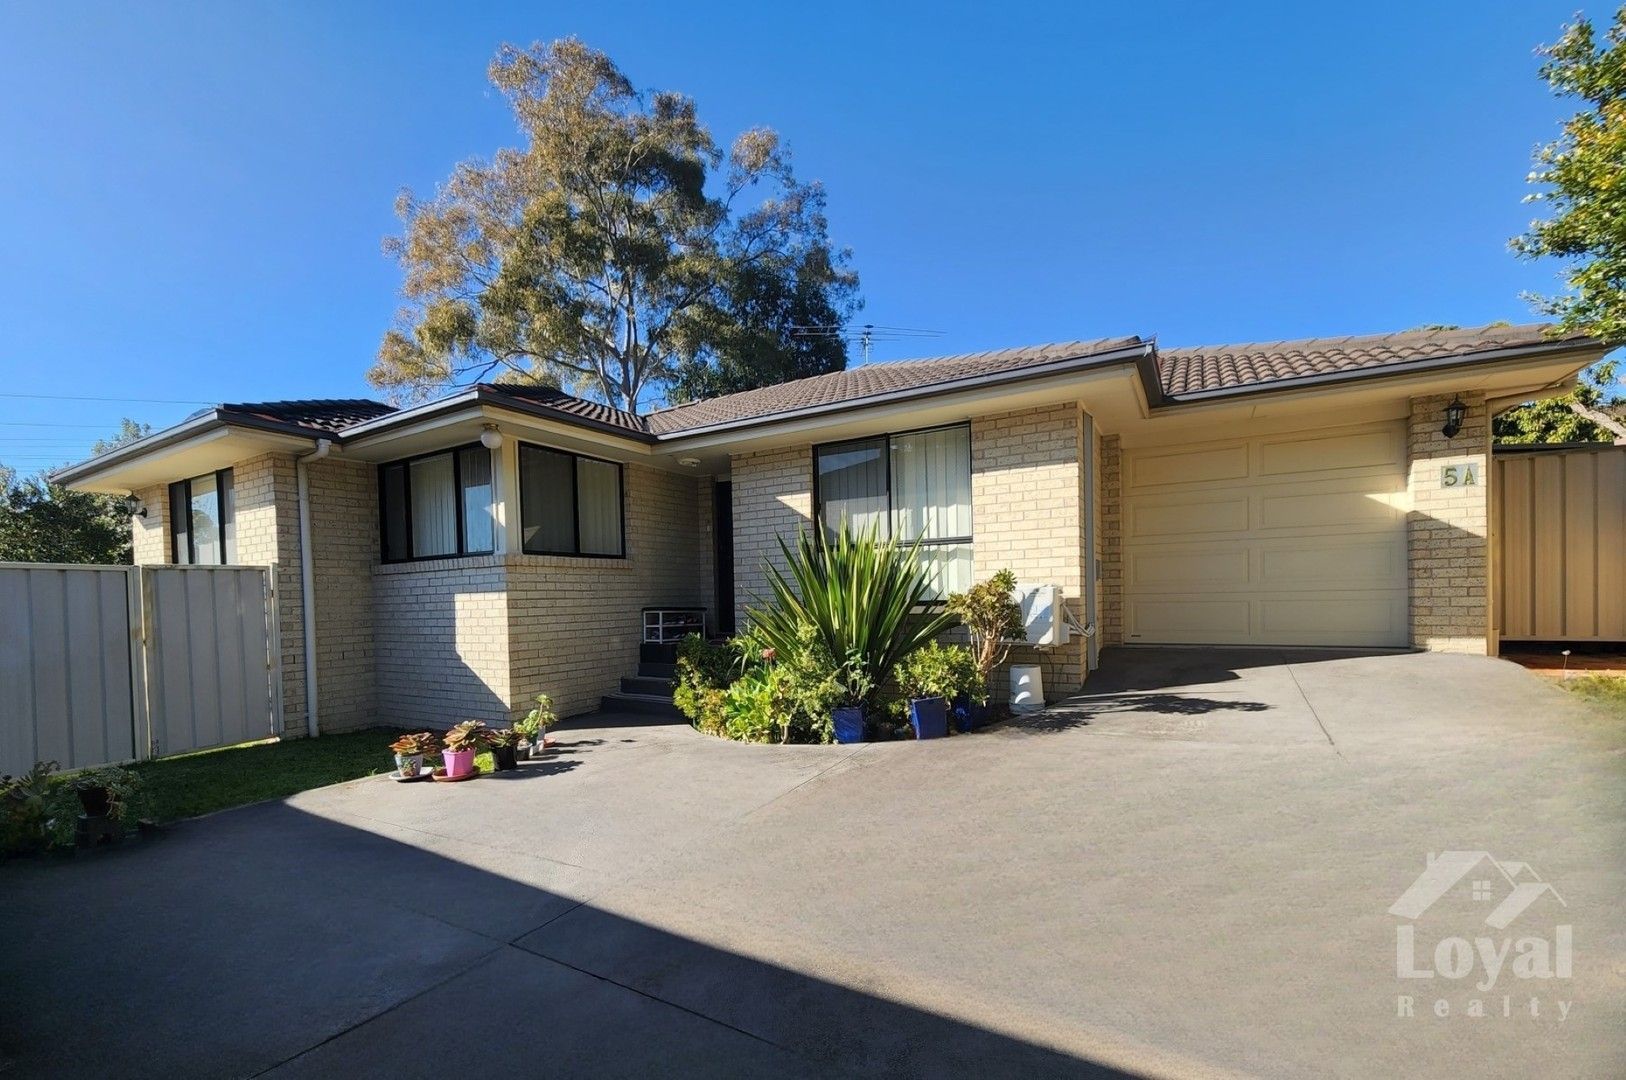 4 bedrooms House in 5a Colin Place CARLINGFORD NSW, 2118